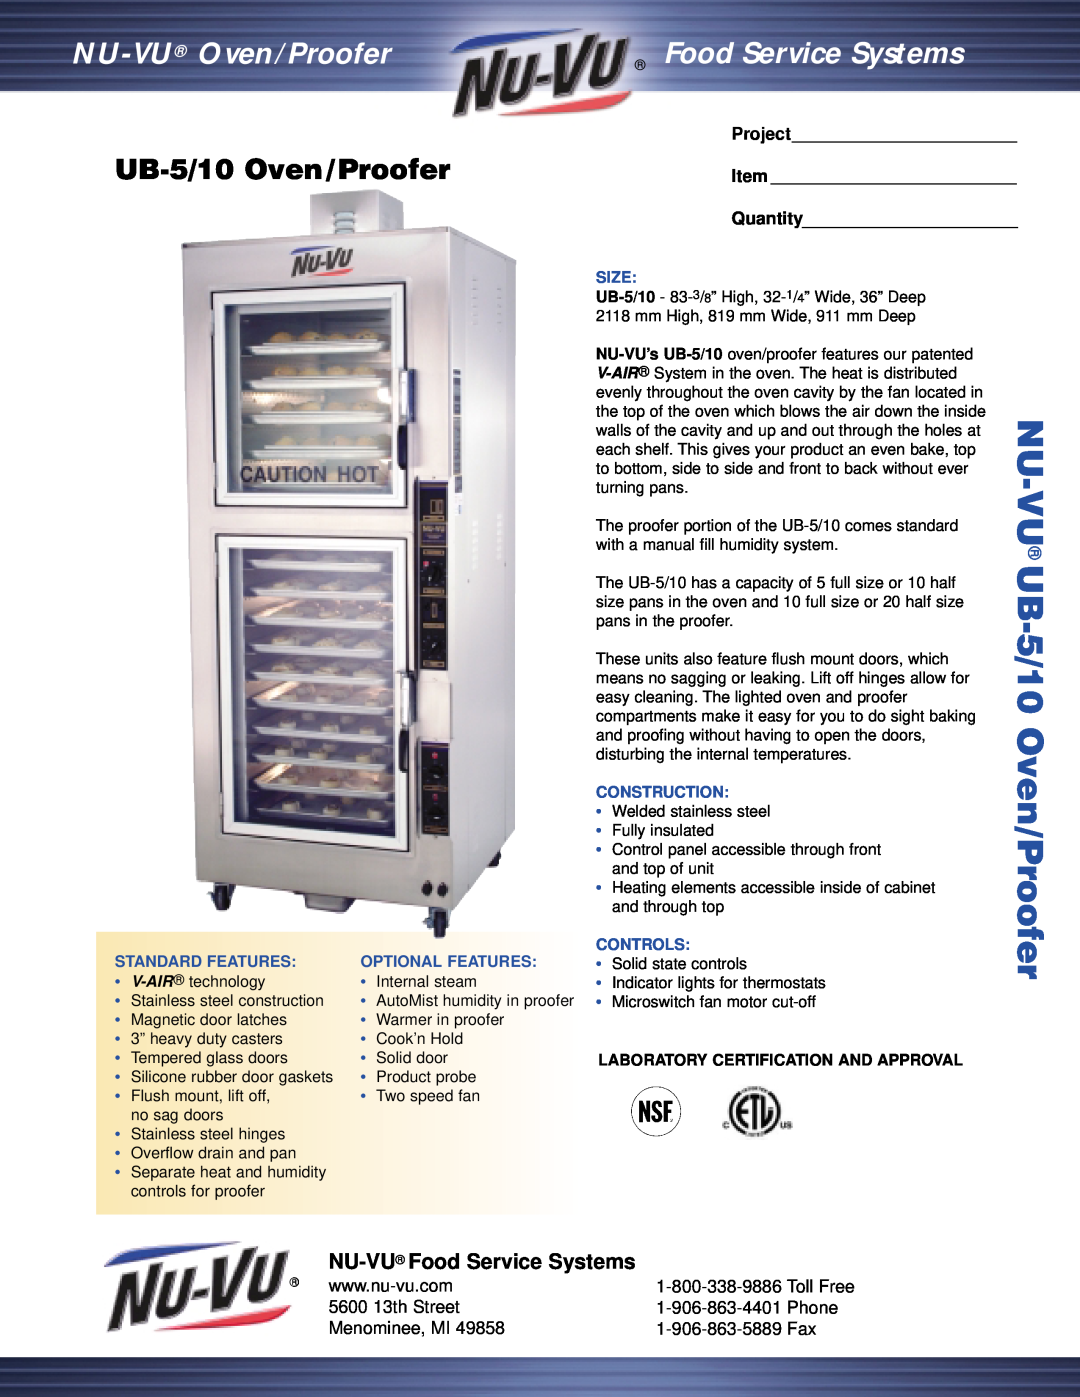 Middleby Cooking Systems Group UB 5/10 manual UB-5/10Oven/Proofer, NU-VU Food Service Systems, 5600 13th Street, Phone 